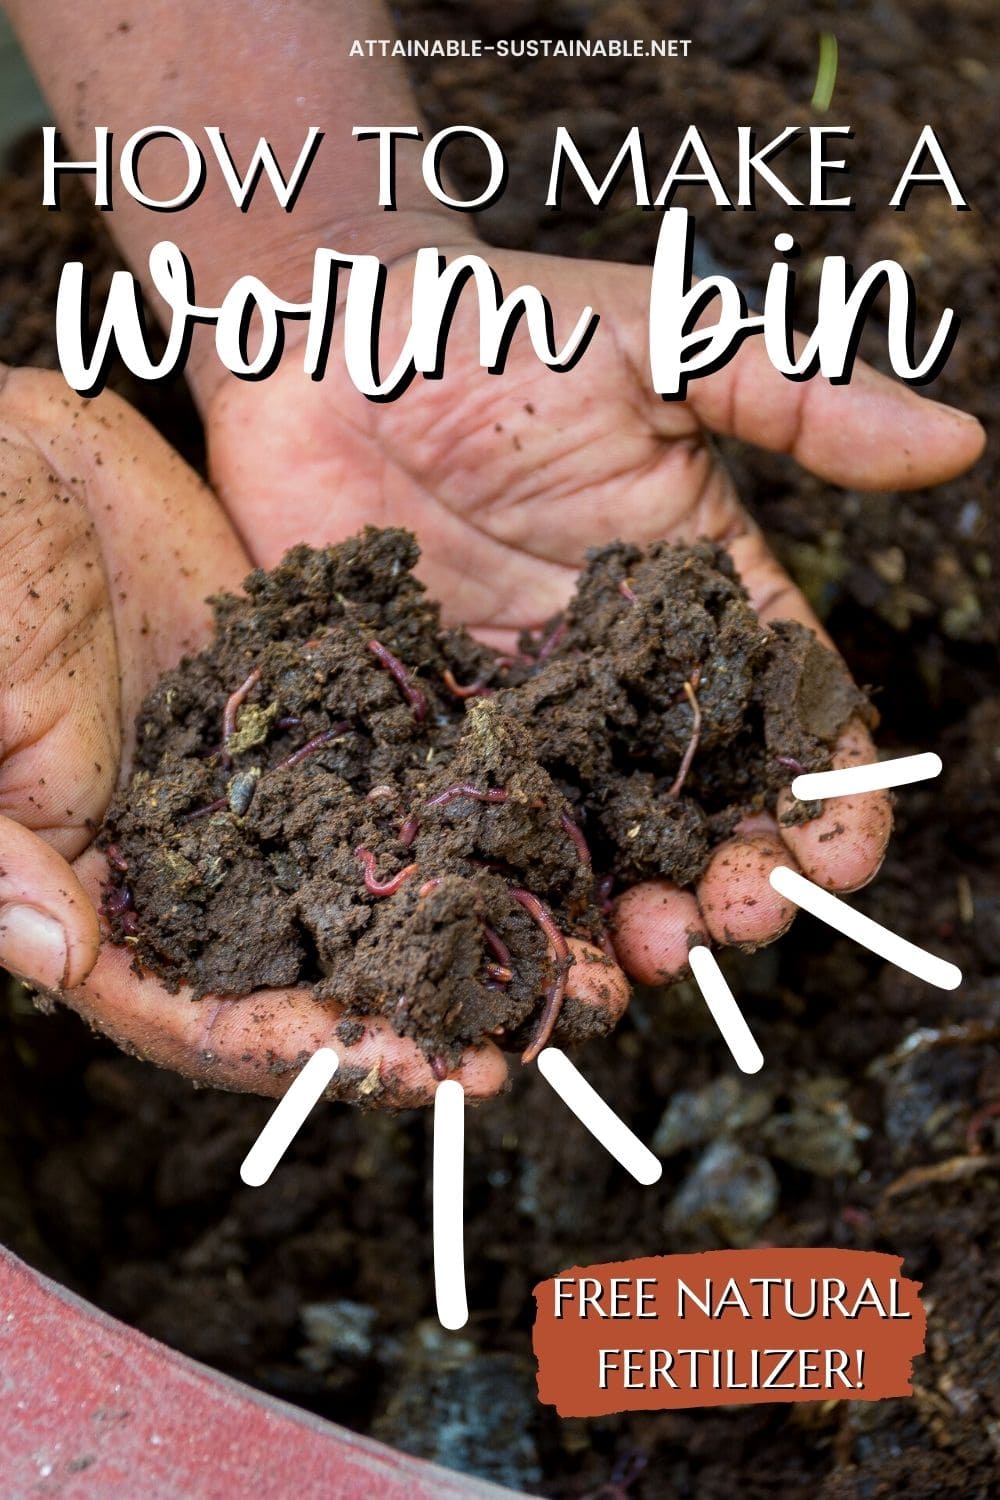 How to Make a Worm Bin for Less than $5 - Easy DIY Worm Composter